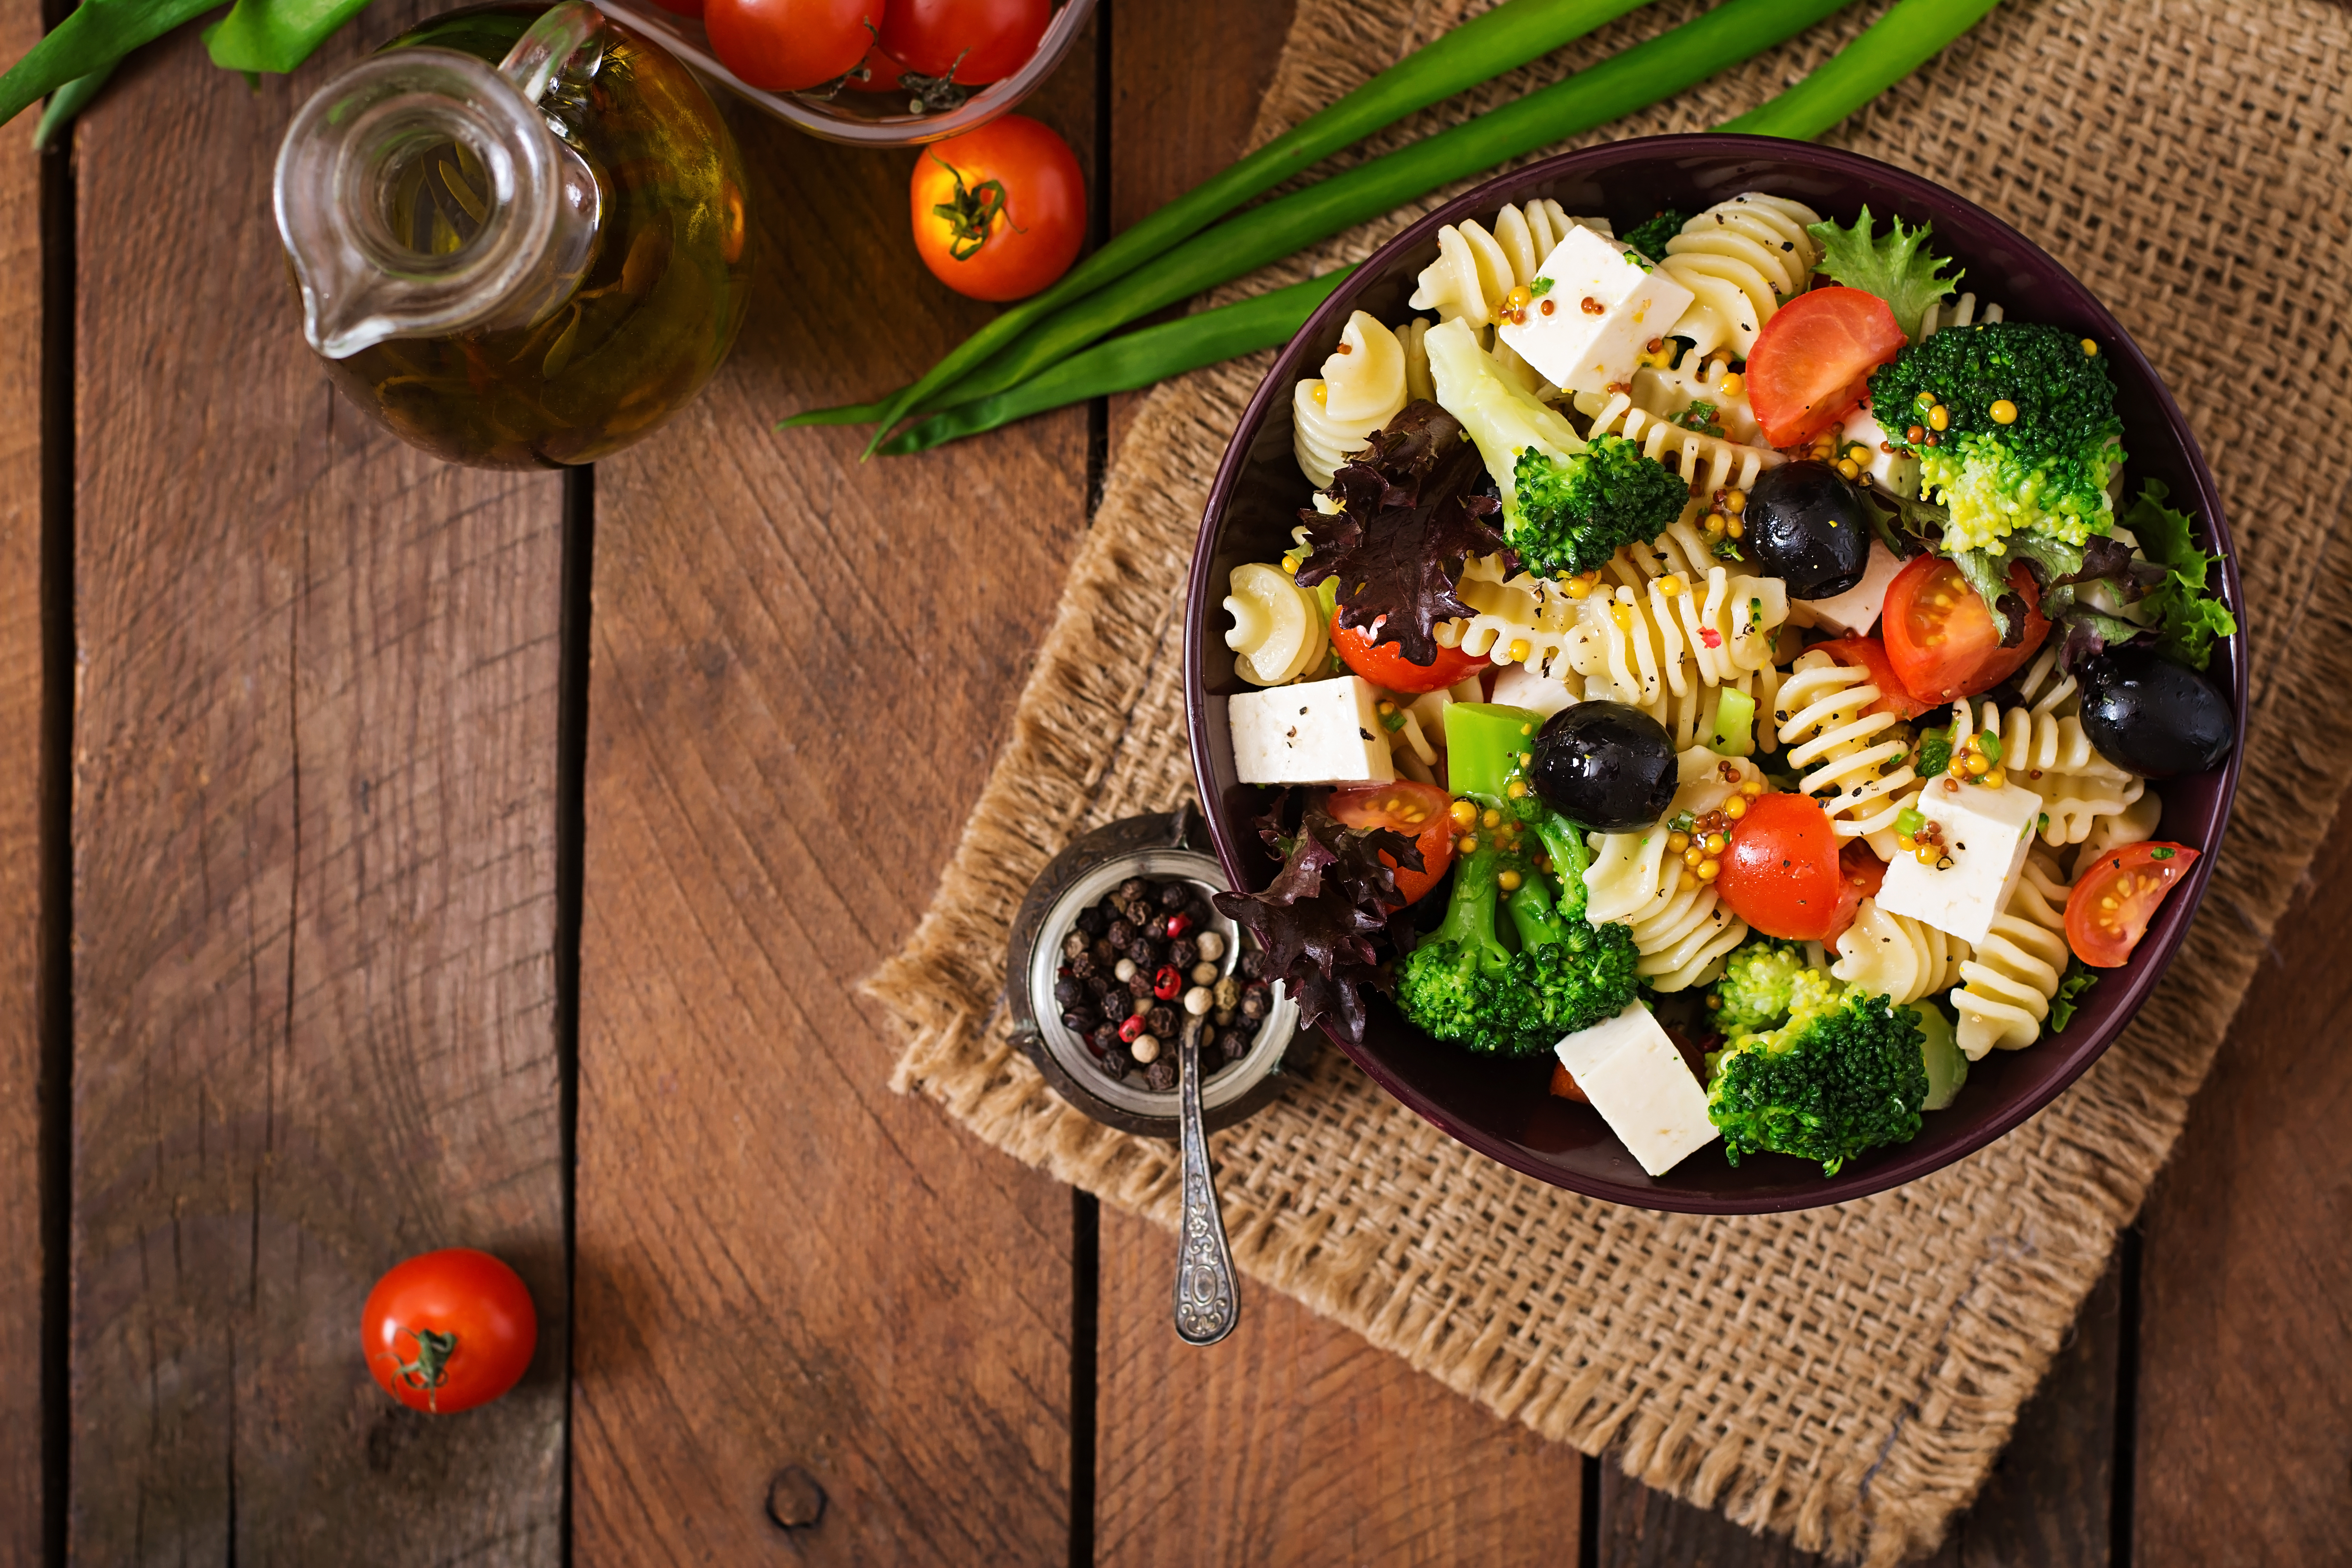 A bowl containing pasta, olives, tomatoes, broccoli, and cheese on top of a wooden surface.